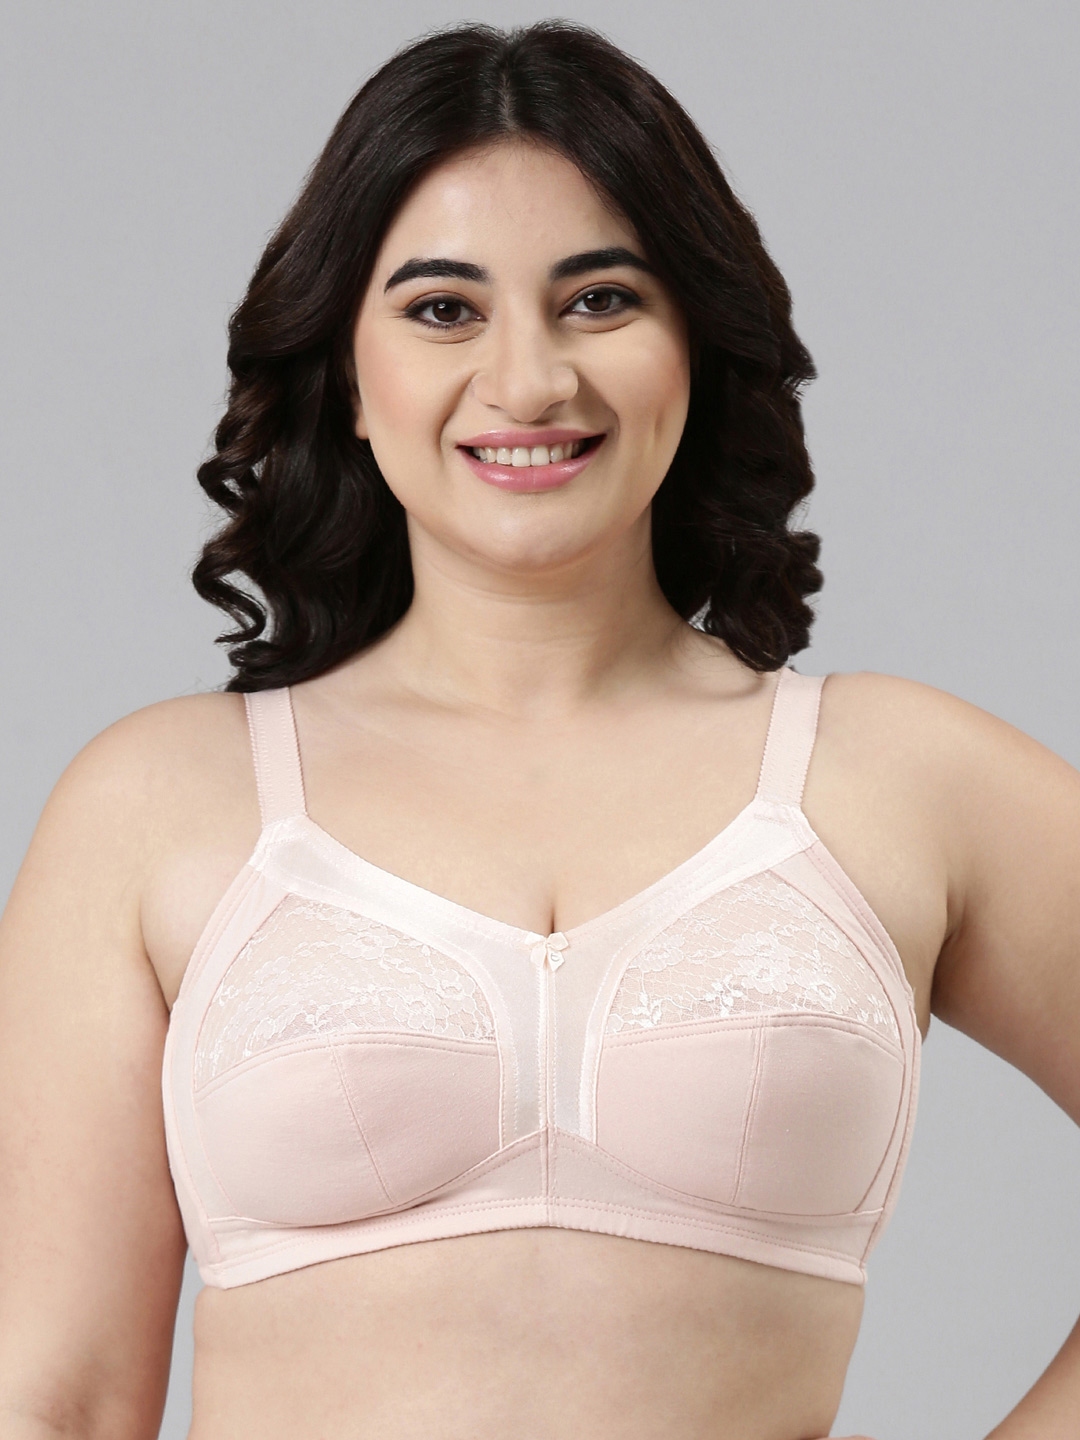 Buy Enamor Padded Non-Wired High Coverage T-Shirt Bra - Dainty